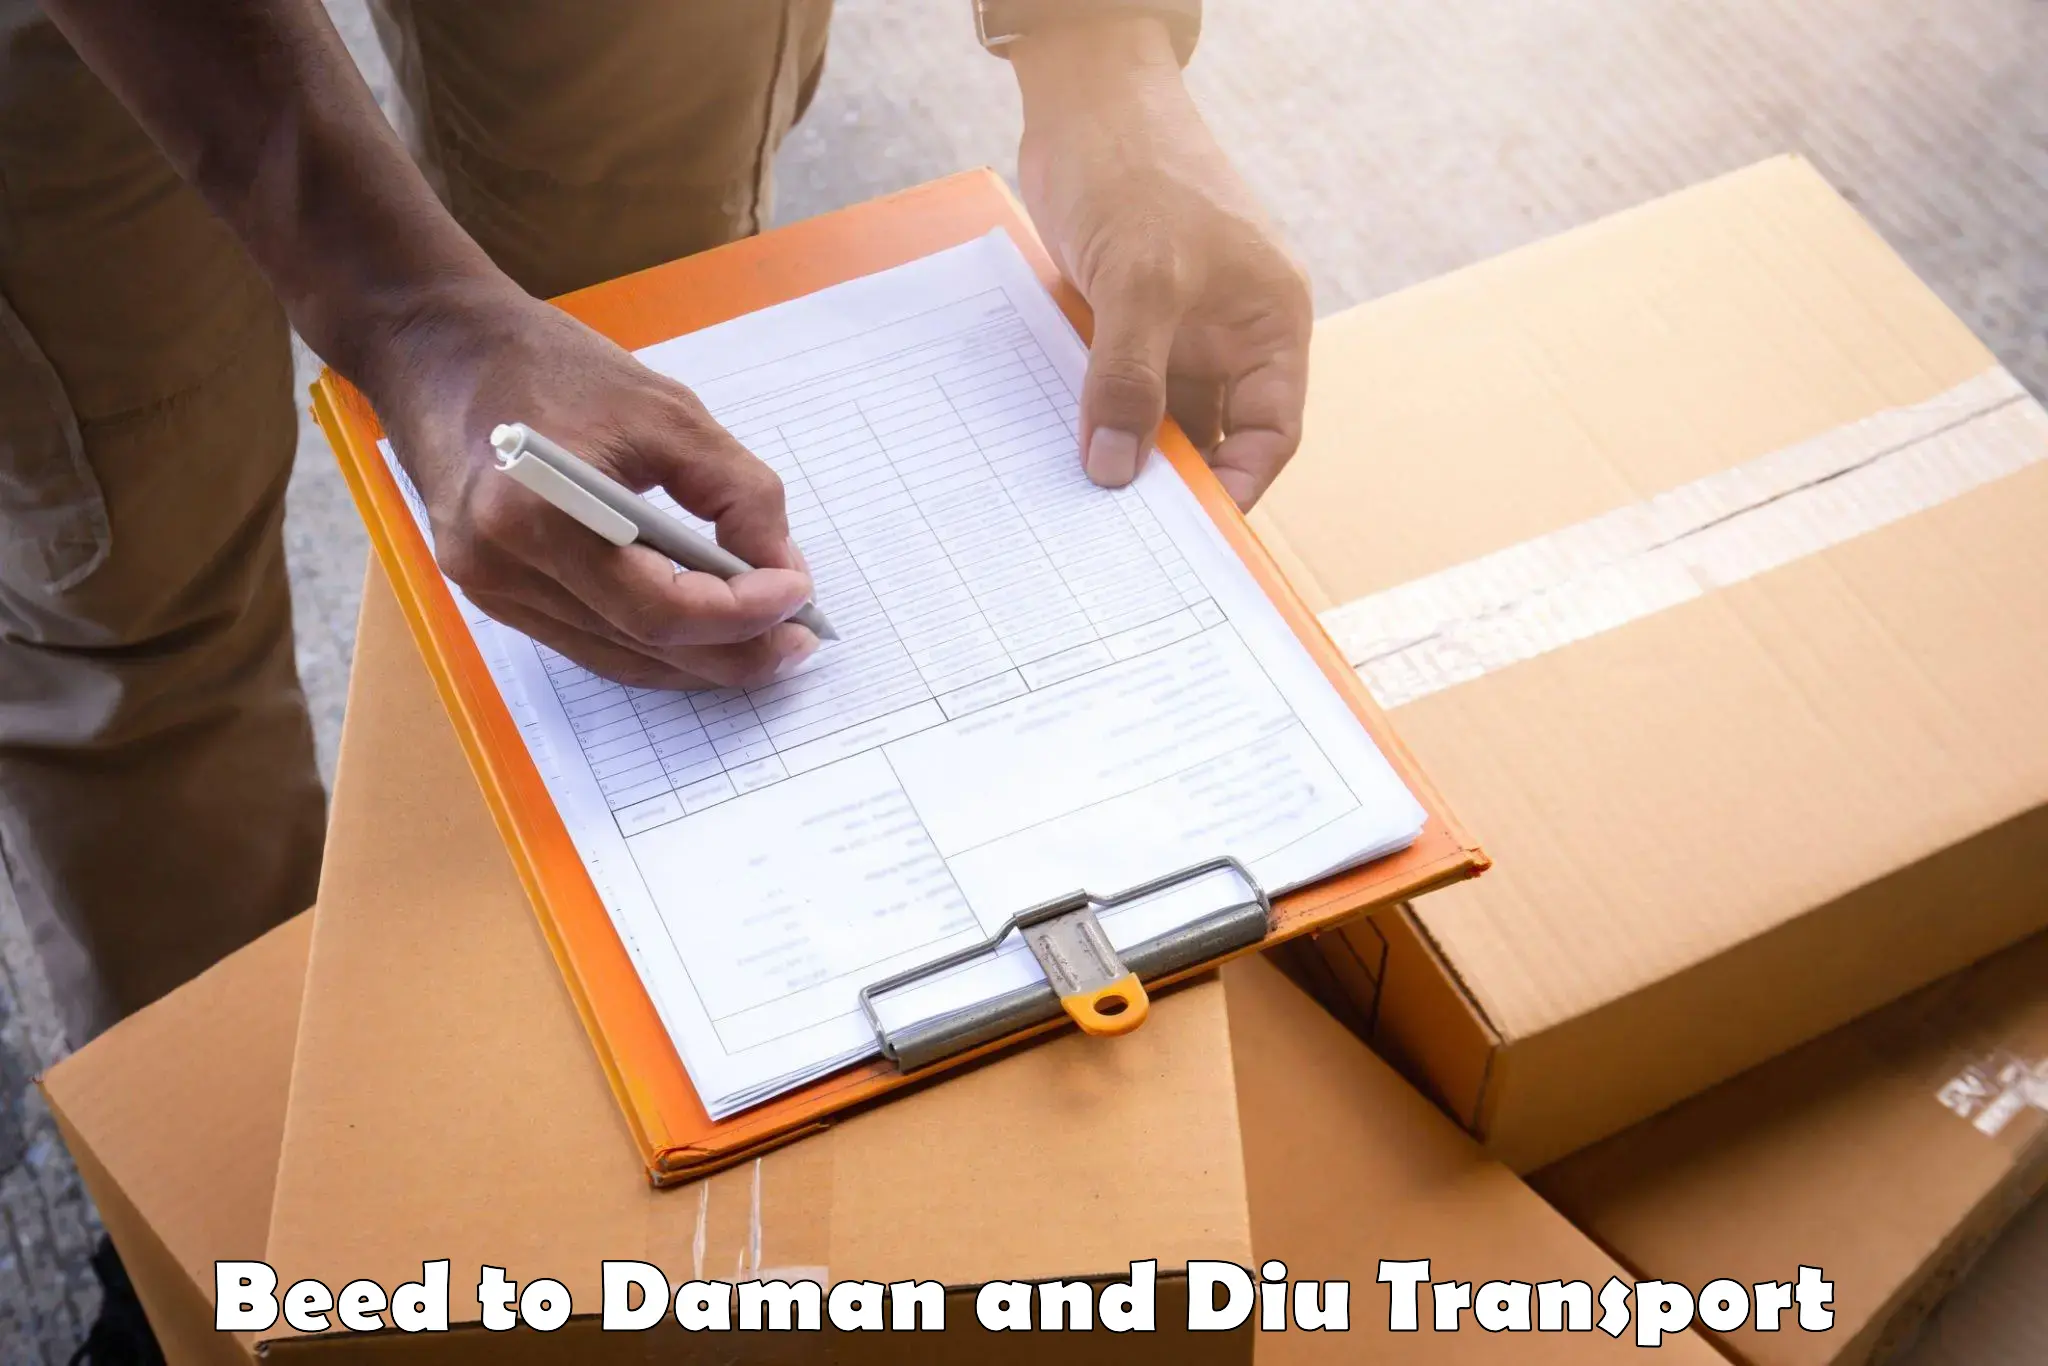 Express transport services Beed to Daman and Diu